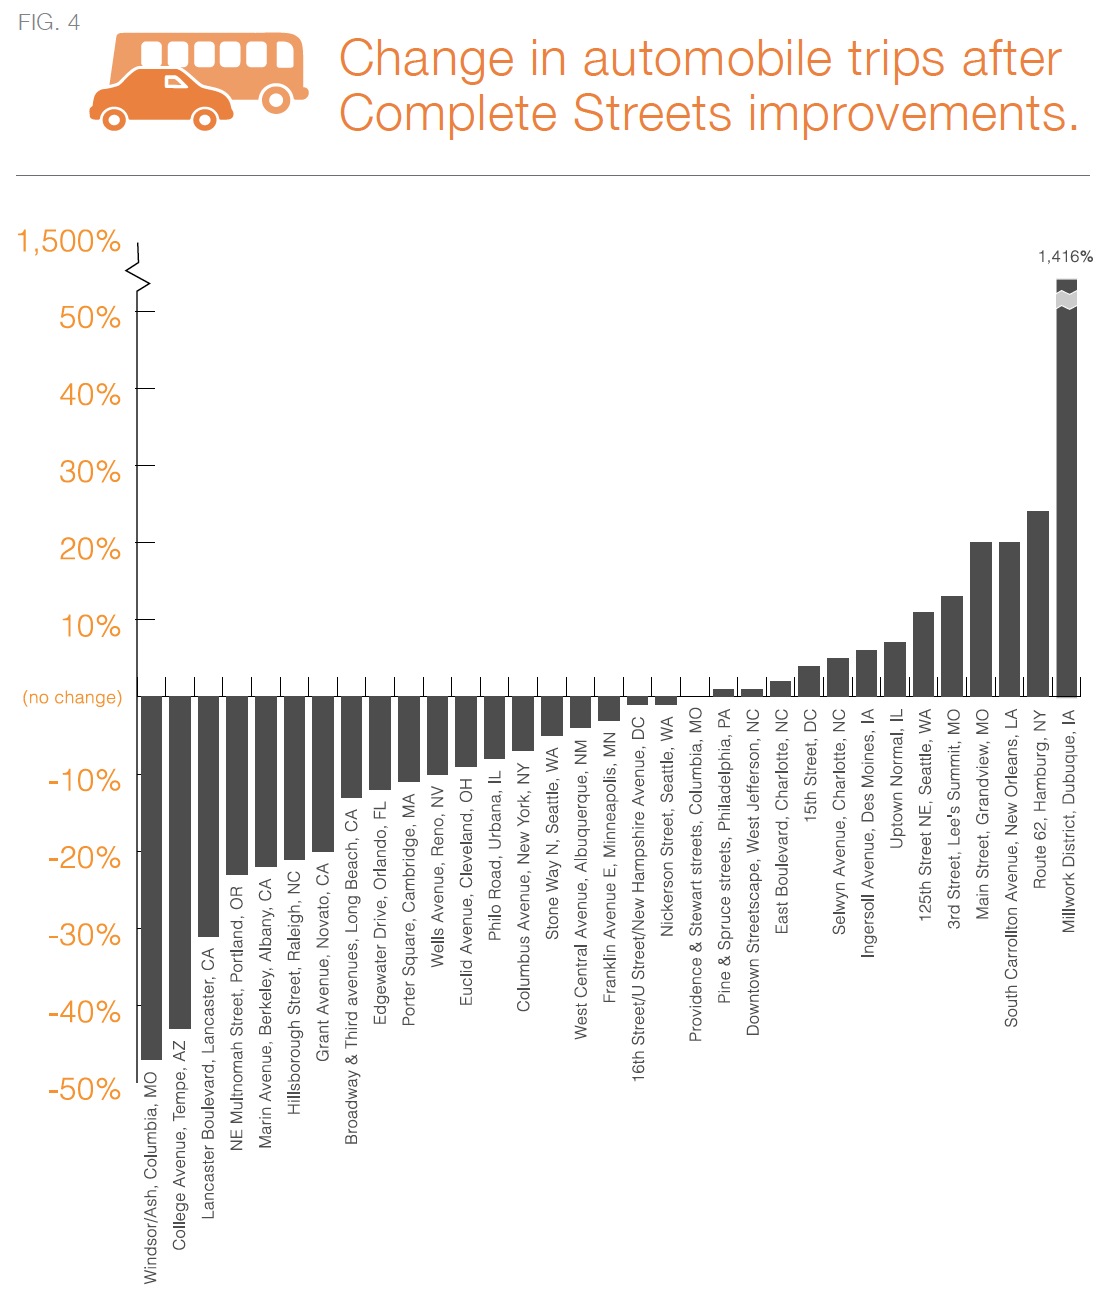 Change in automobile trips after Complete Streets improvements.